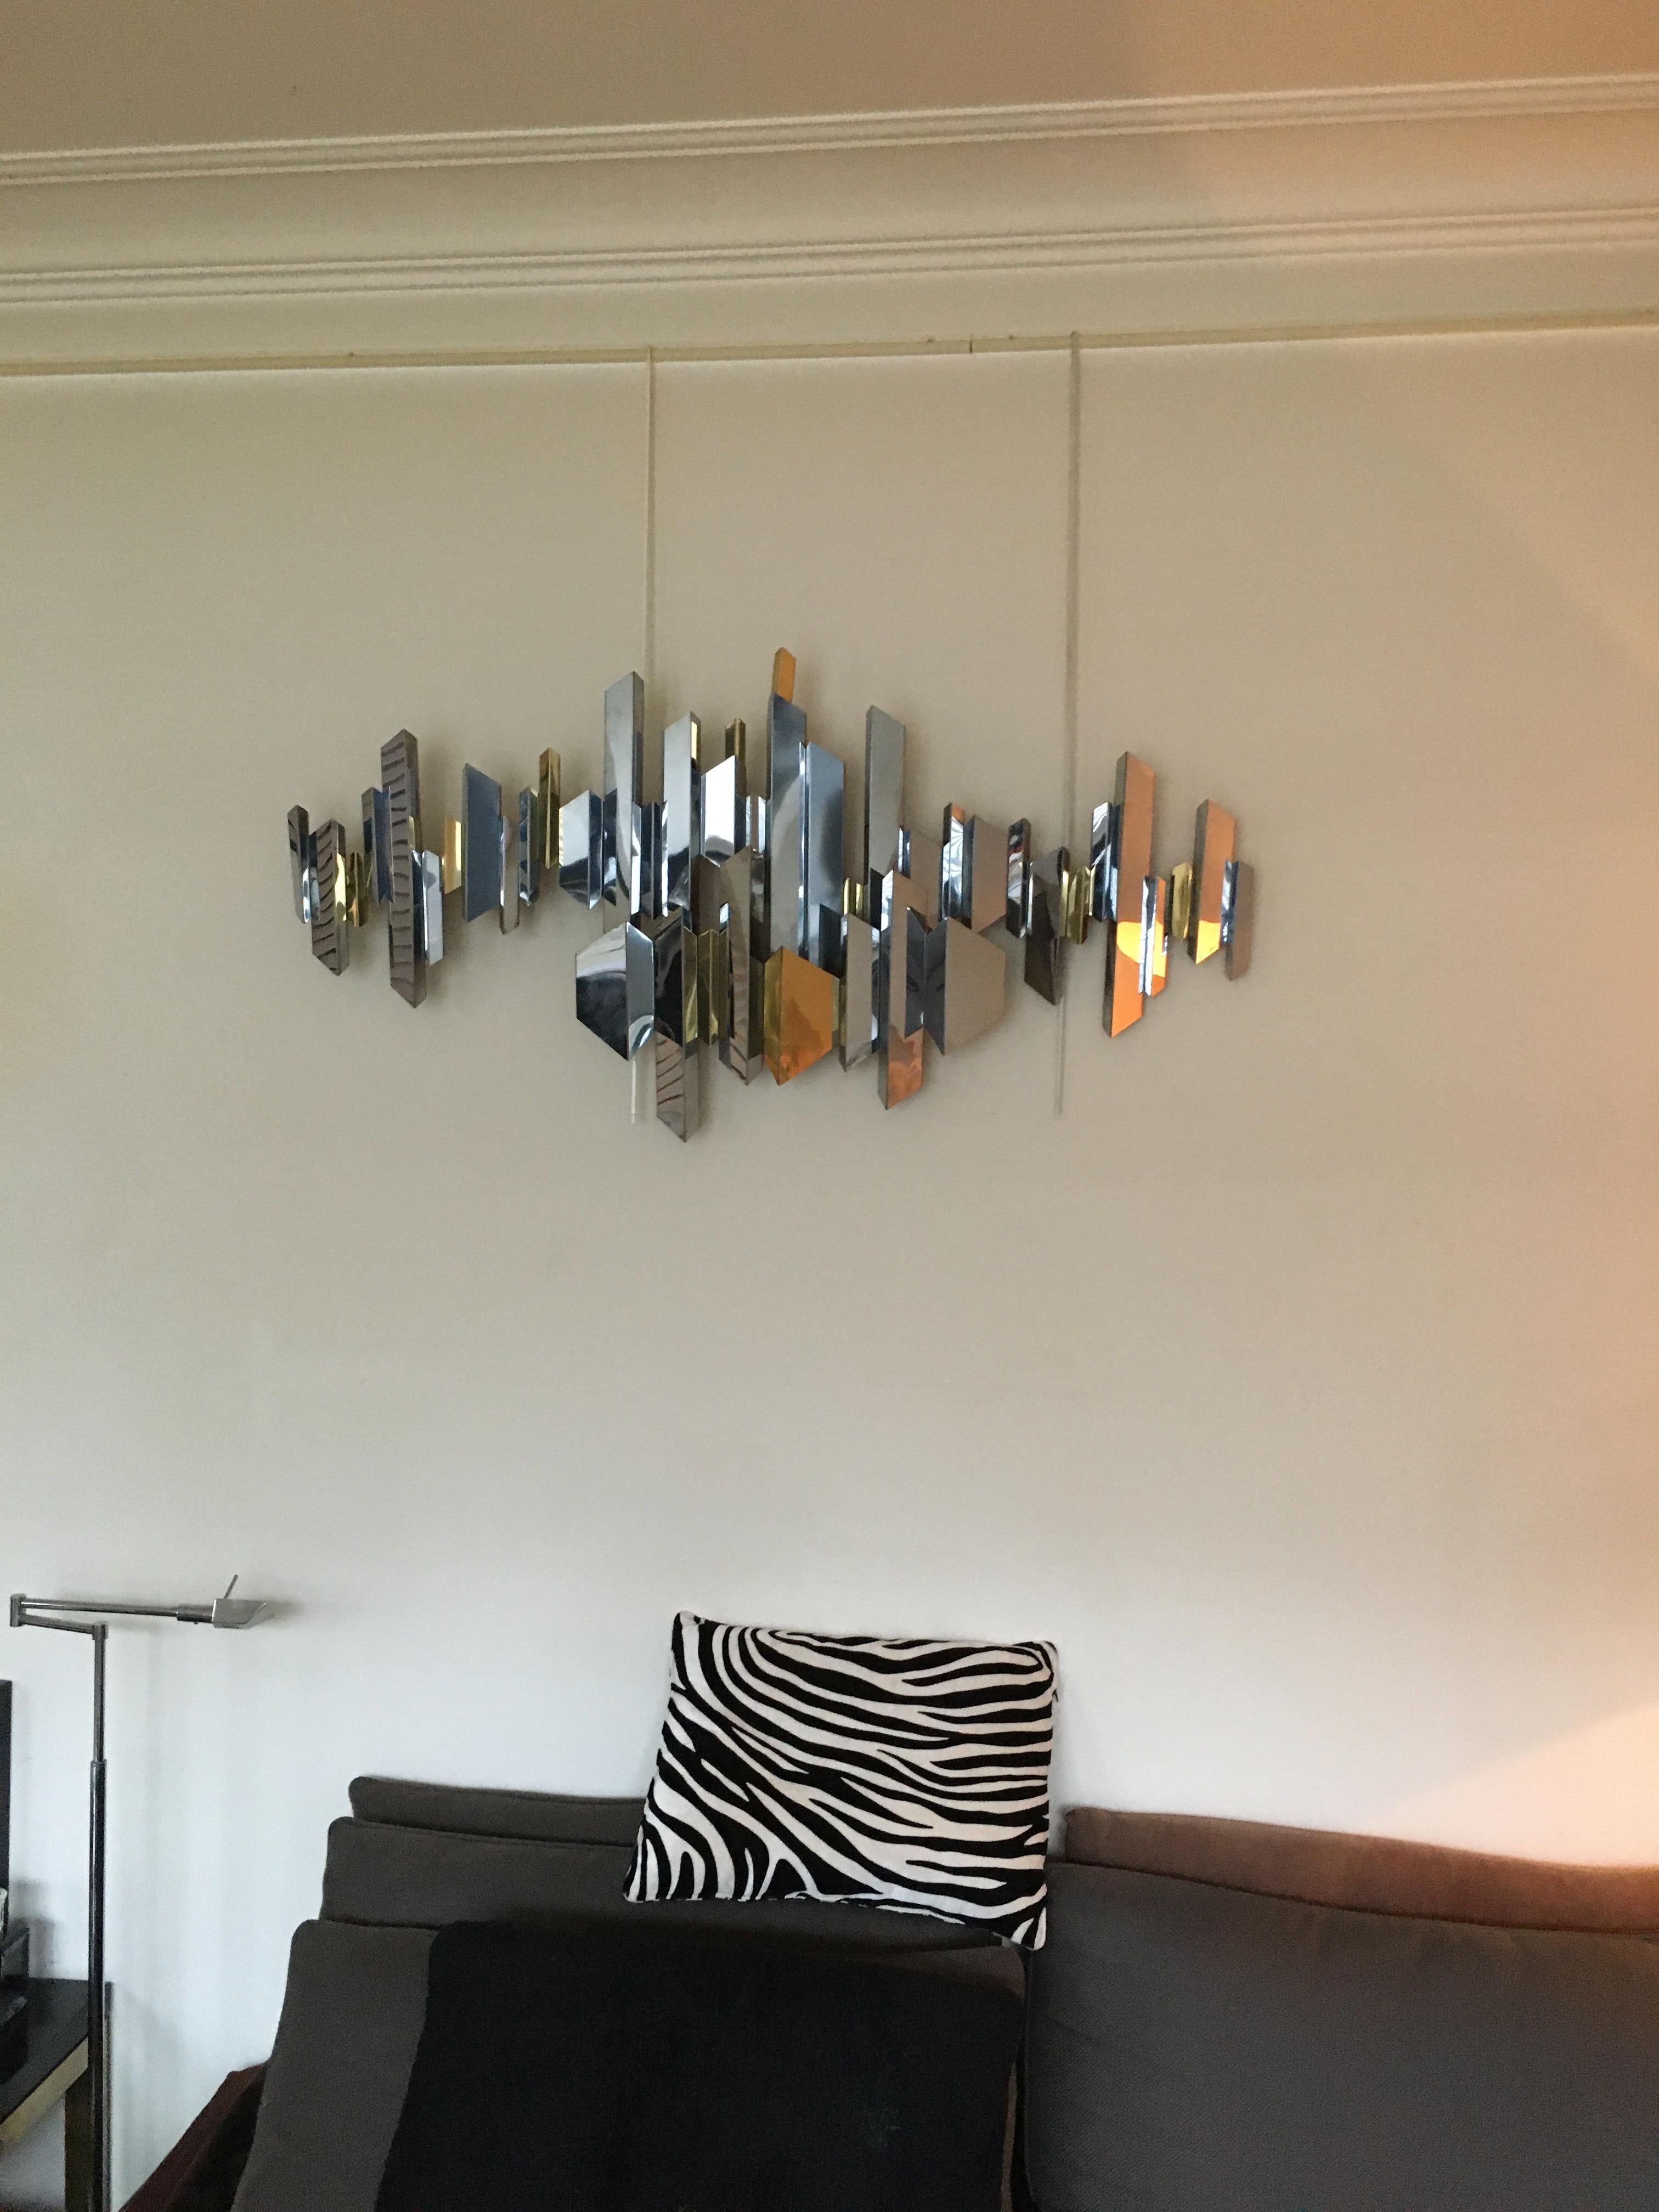 Two tones (chrome and brass) 1970s wall sculpture by Curtis Jere.
Can be fixed horizontally or vertically.
Signed C.Jere.